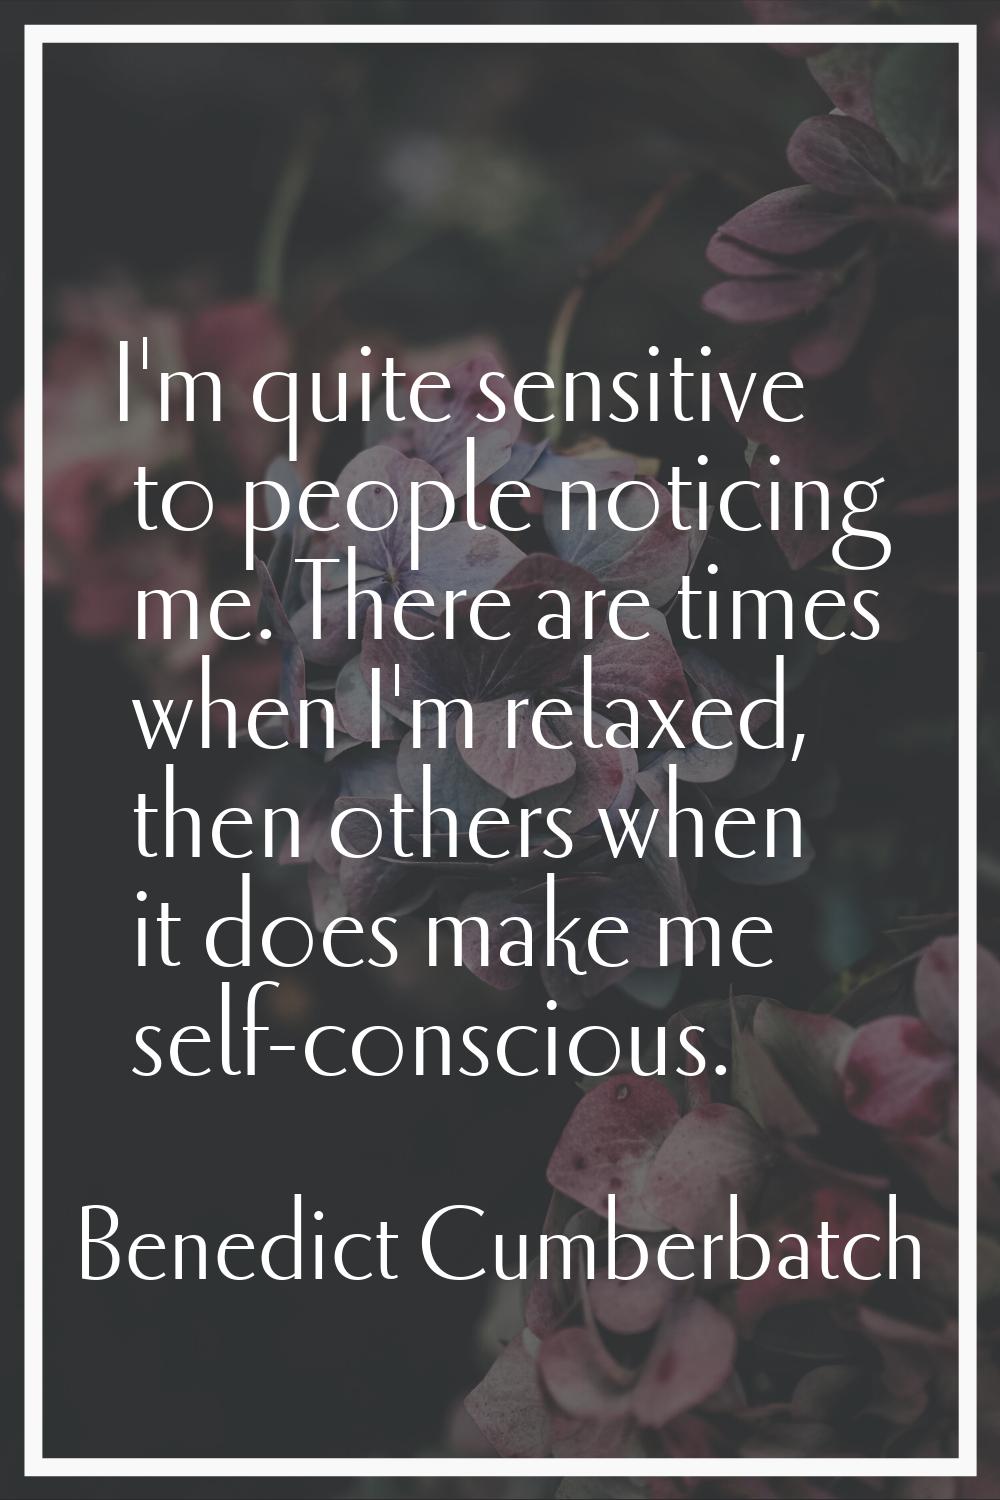 I'm quite sensitive to people noticing me. There are times when I'm relaxed, then others when it do